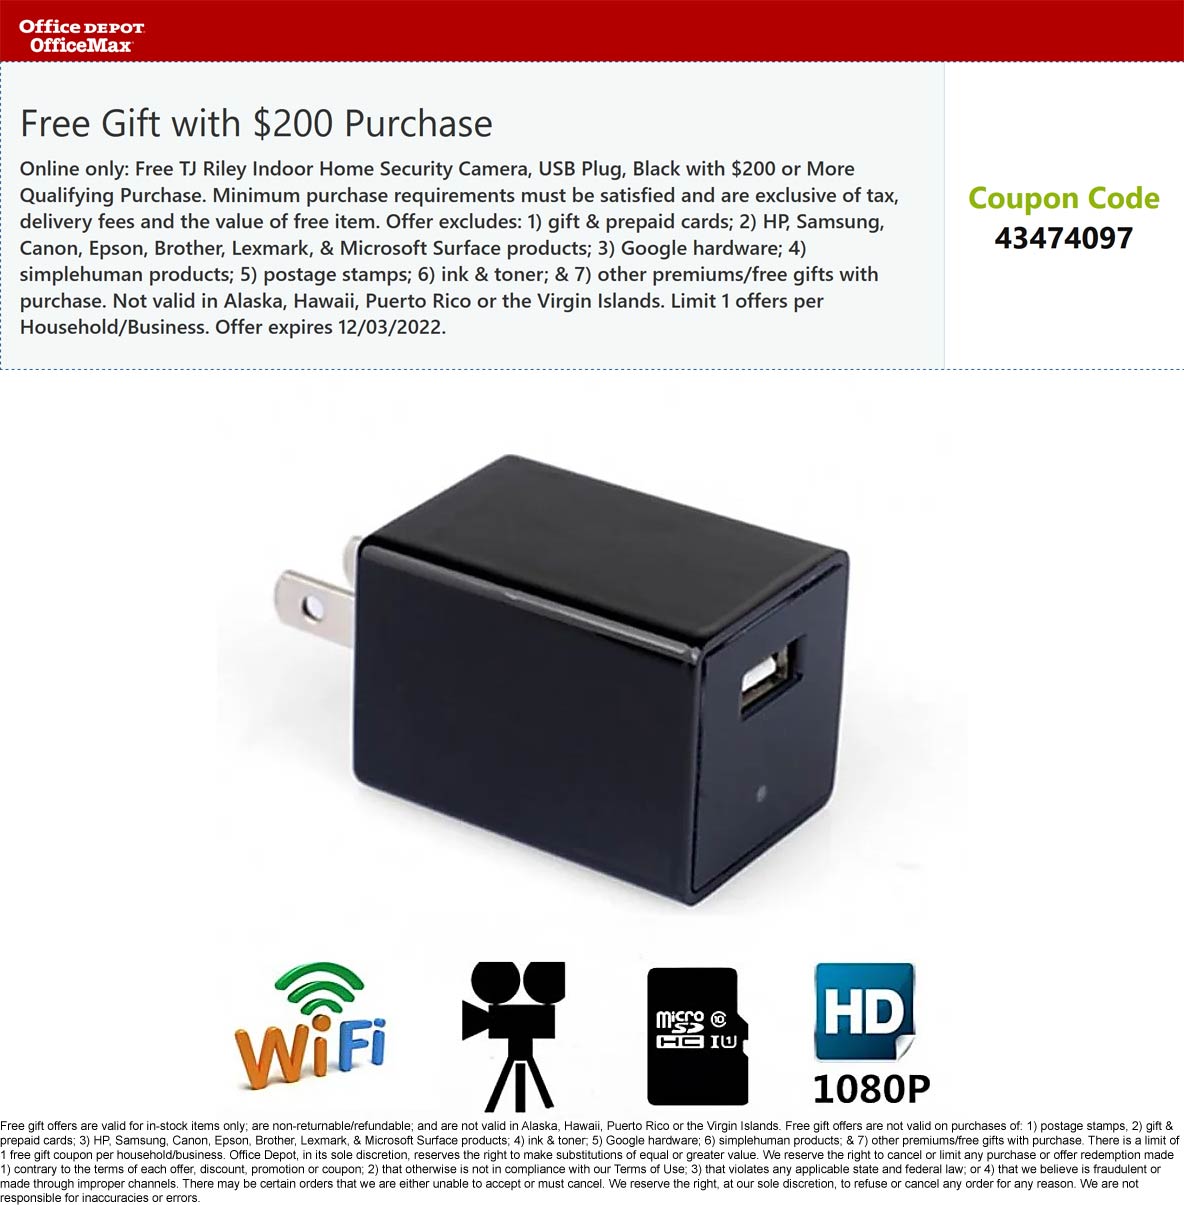 Office Depot stores Coupon  Free $40 hidden camera USB plug on $200 at Office Depot OfficeMax via promo code 43474097 #officedepot 